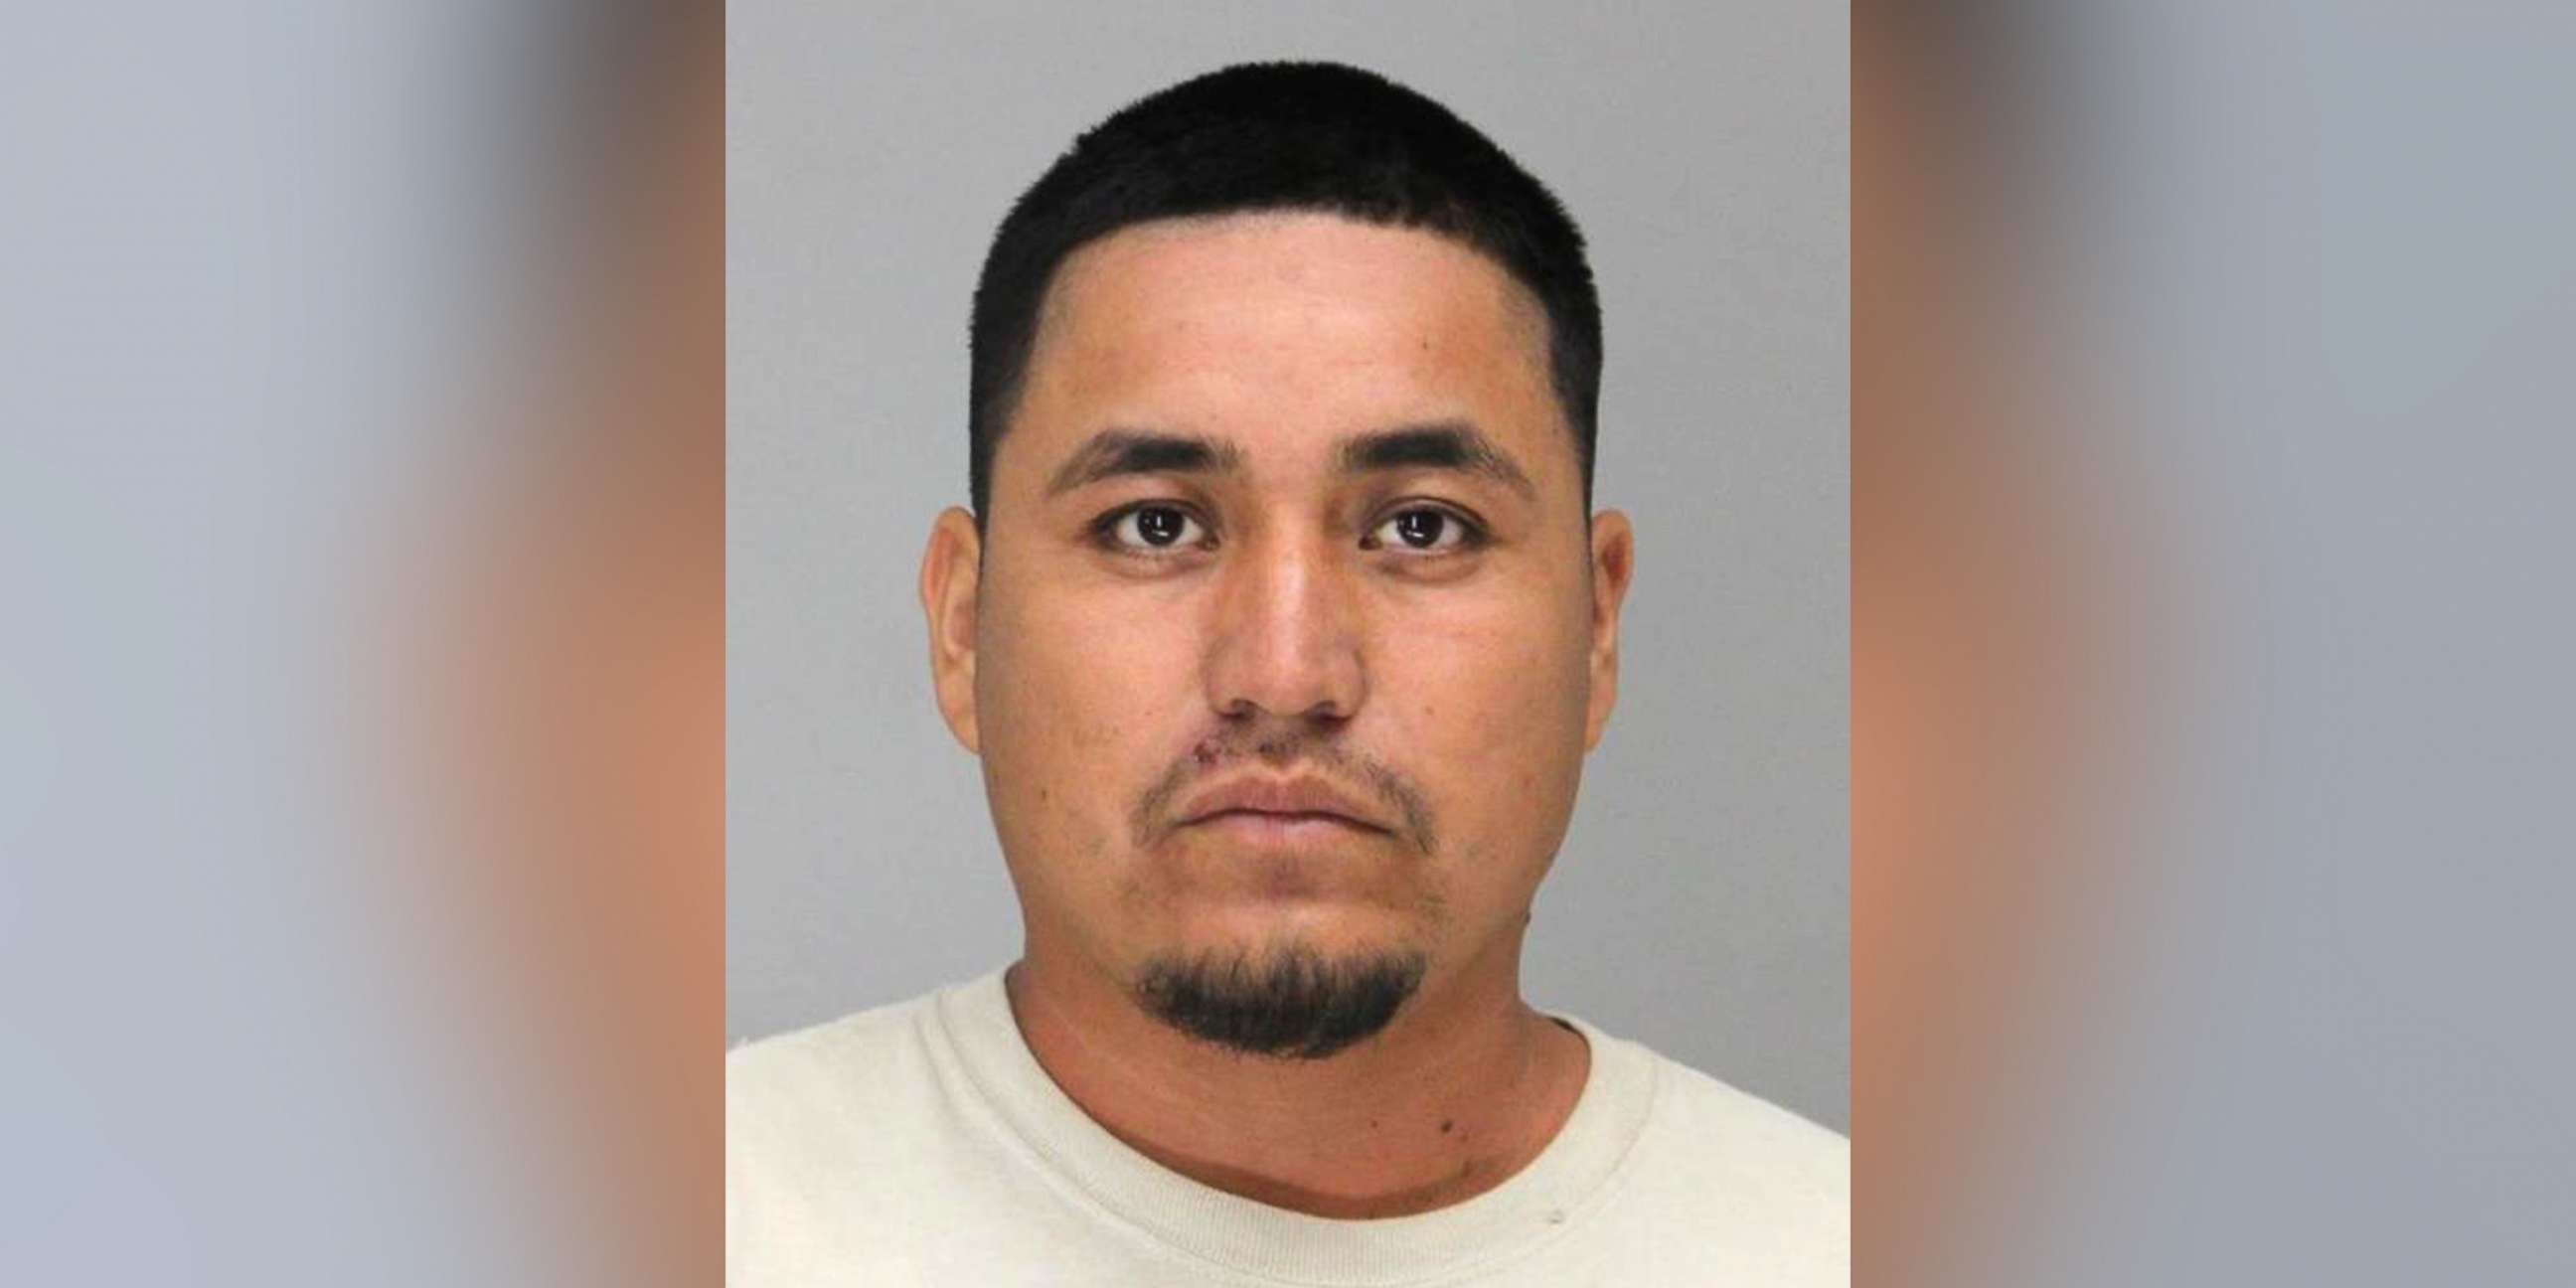 PHOTO: Domingo Ramirez-Cavente, 29, pictured in a photo released by authorities, has been charged with aggravated assault for the shooting of a transgender woman in Dallas.